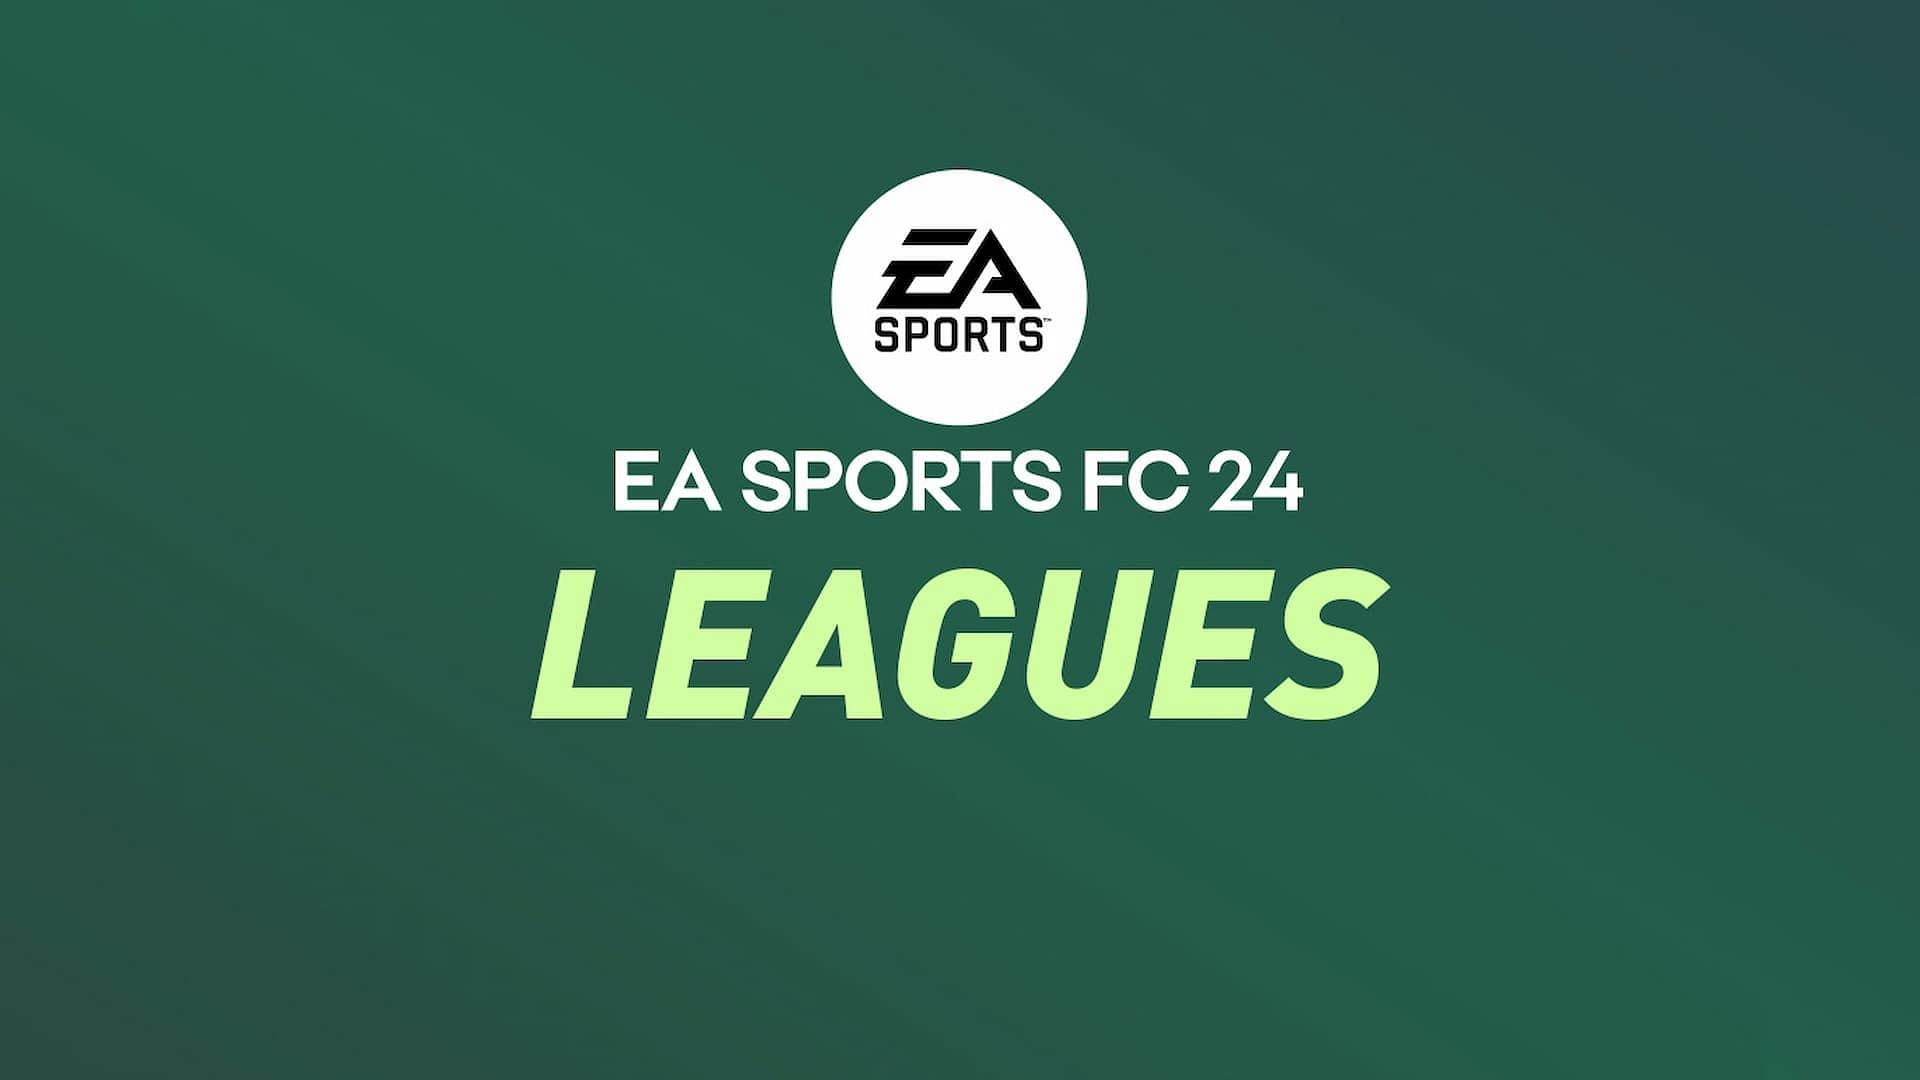 List of leagues that are making into EA Sports FC 24